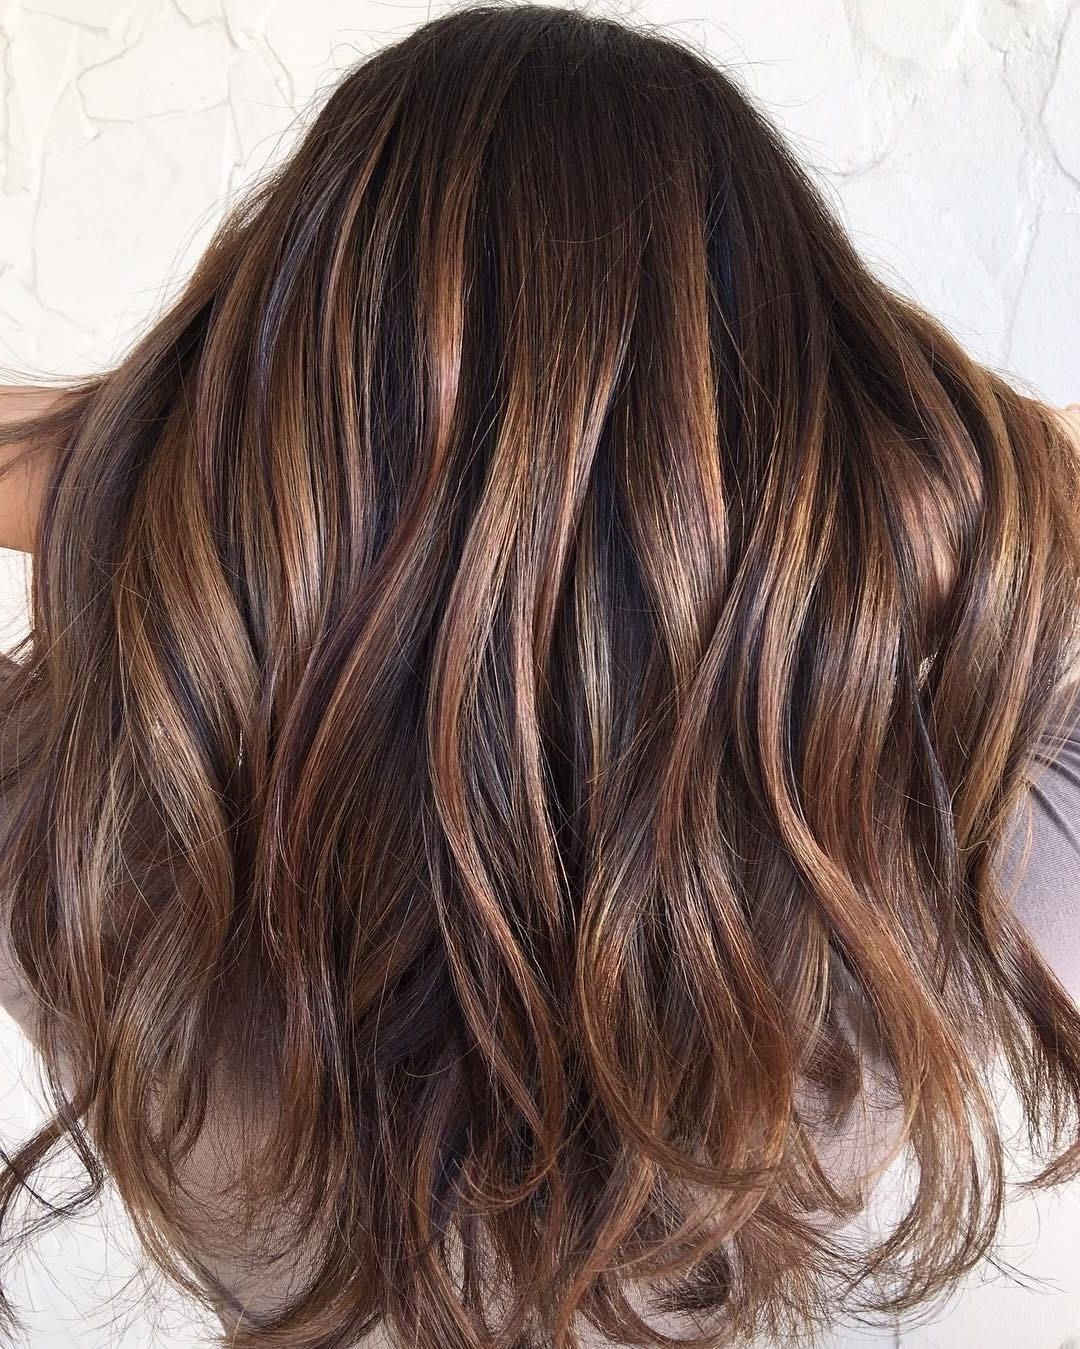 20 Tiger Eye Hair Ideas To Hold Onto | Hair | Pinterest | Balayage For Most Popular Feathered Pixie Haircuts With Balayage Highlights (View 15 of 15)